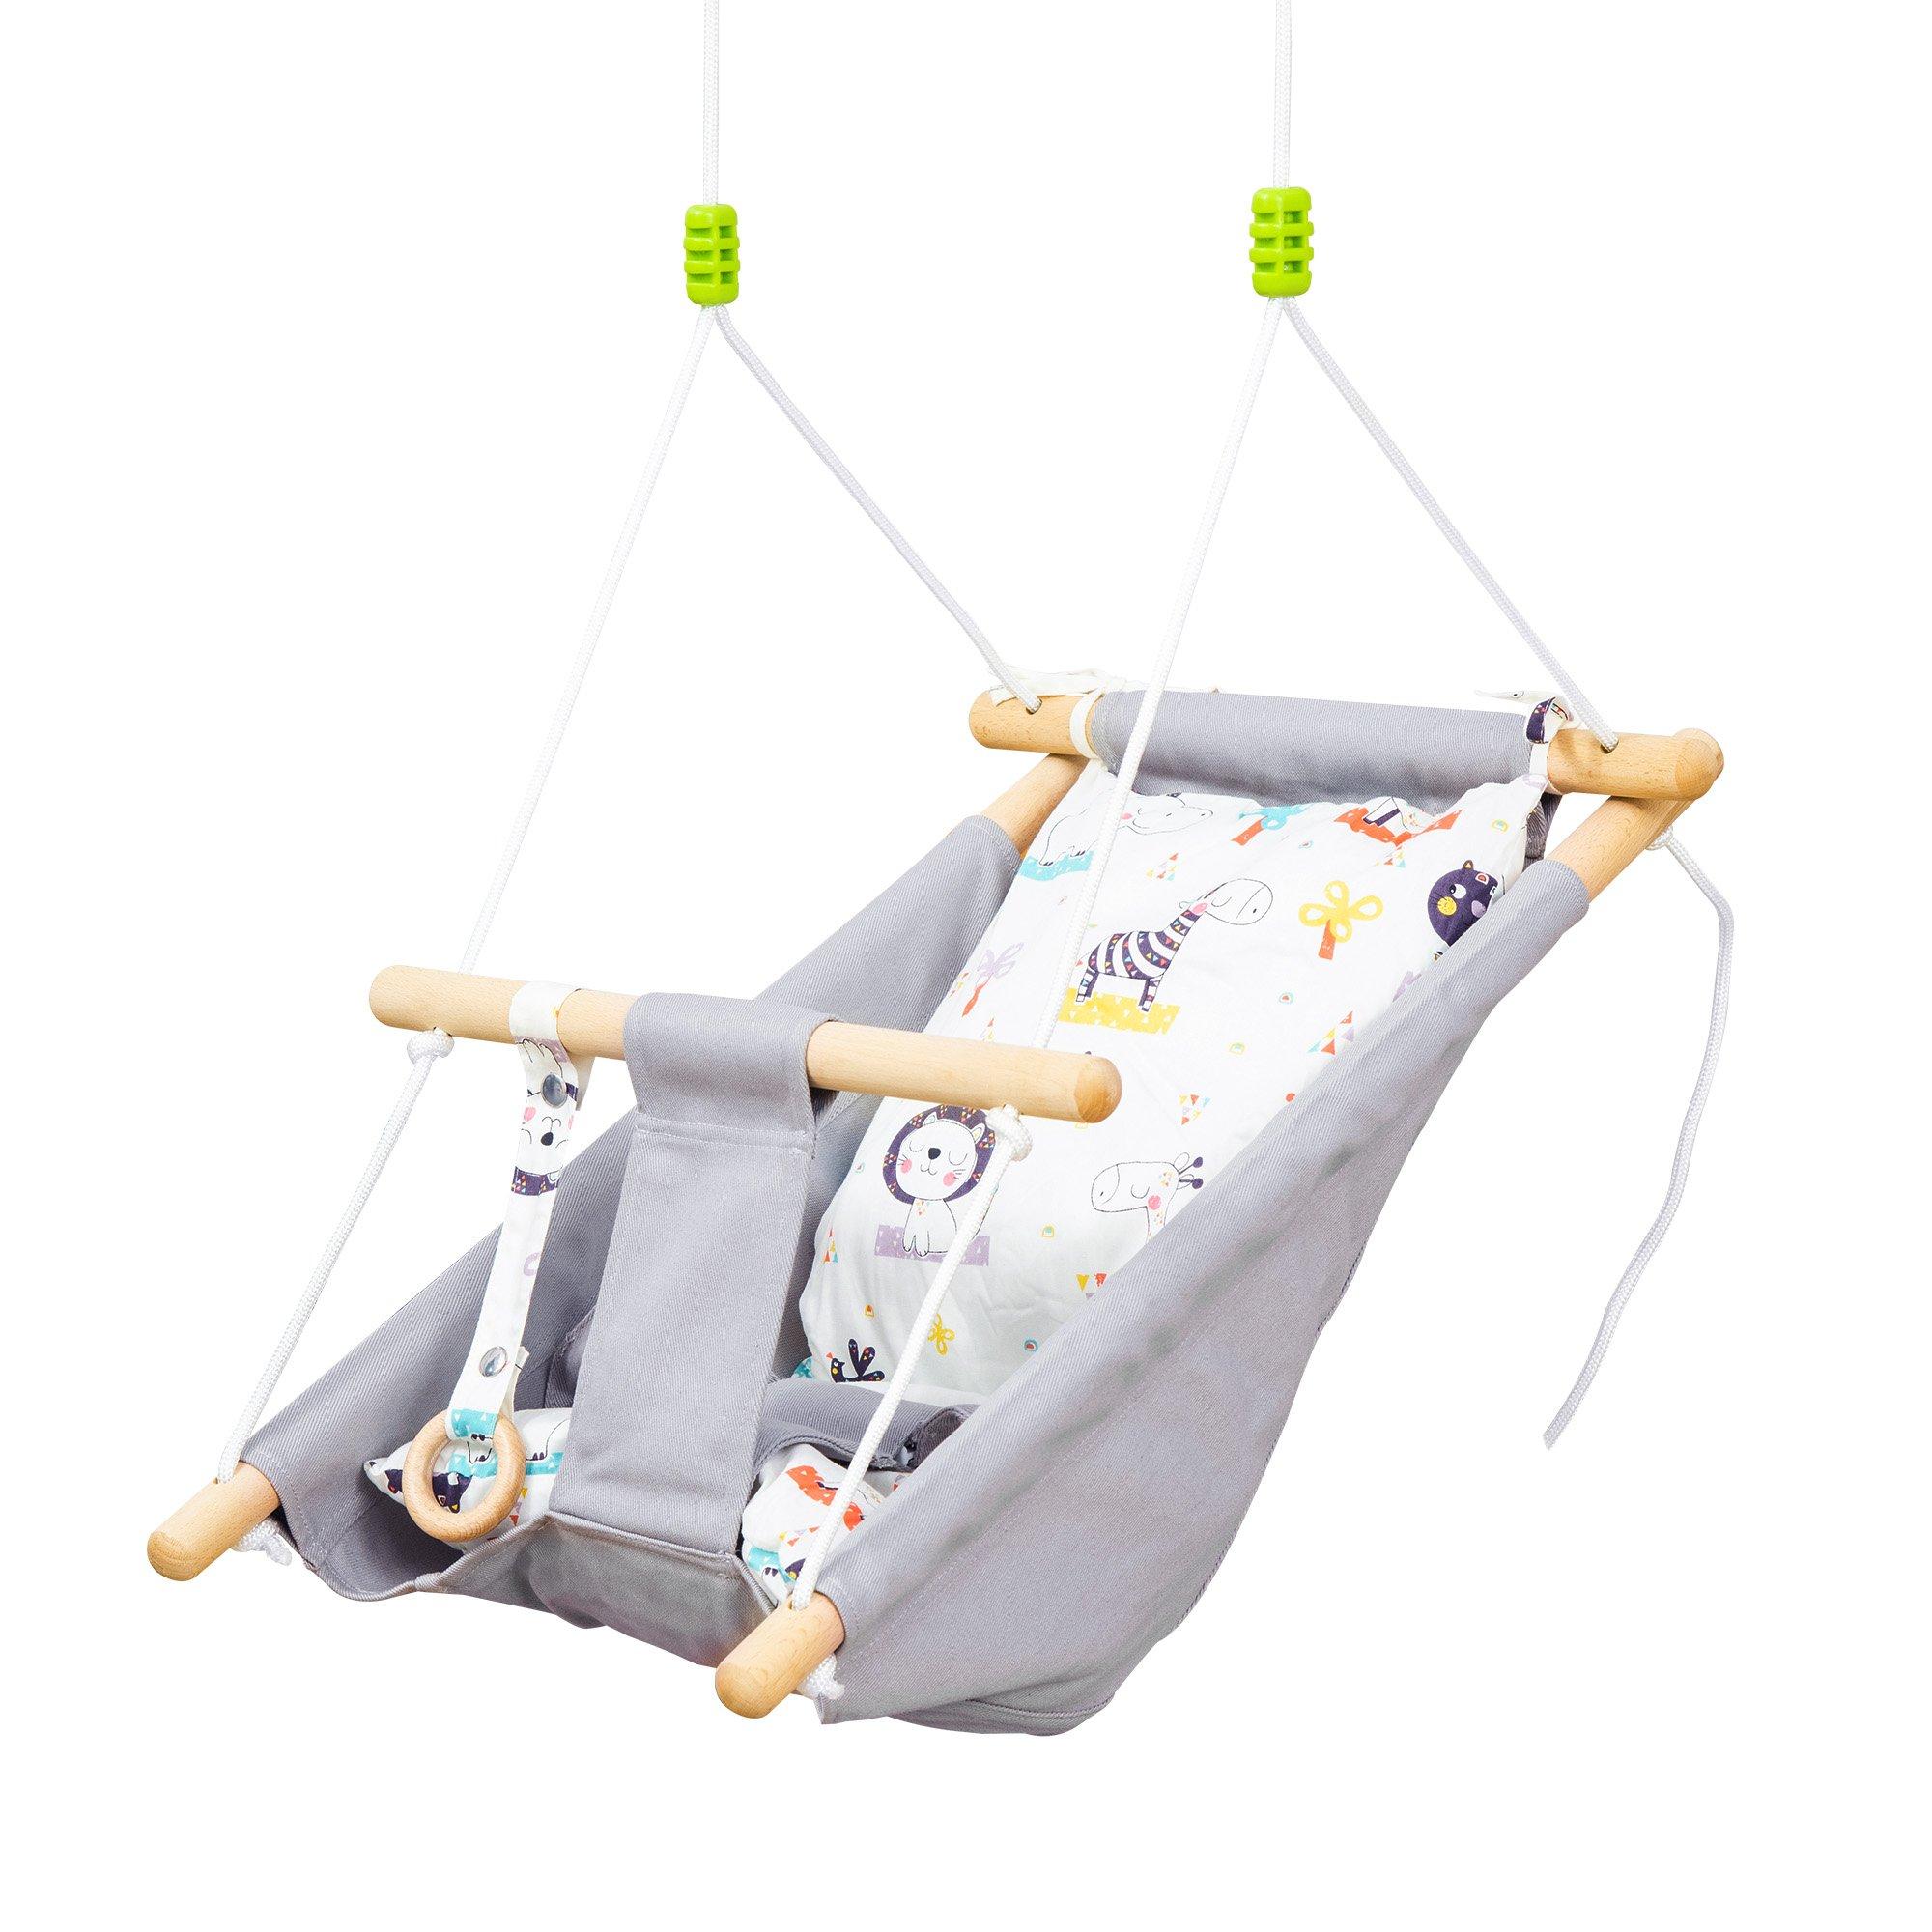 Kids Hammock Swing Chair Hanging Seat with Adjustable Rope for 6-36 Months